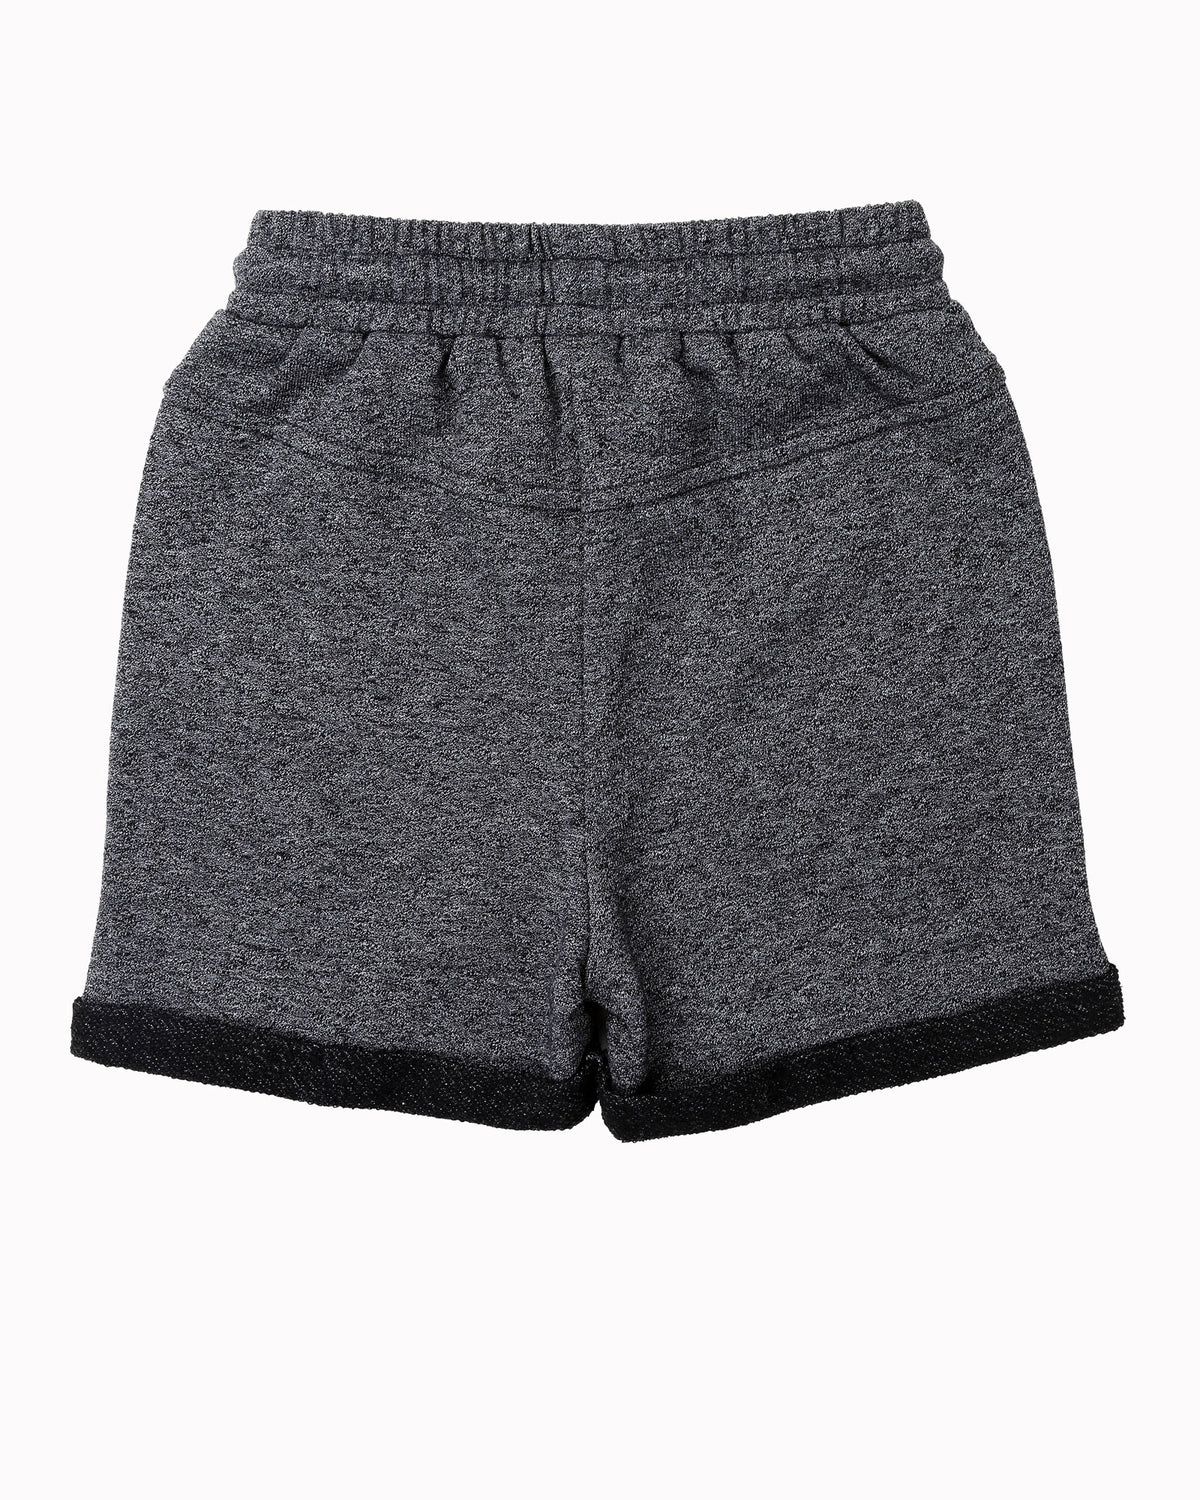 Everyday Short In Charcoal Back